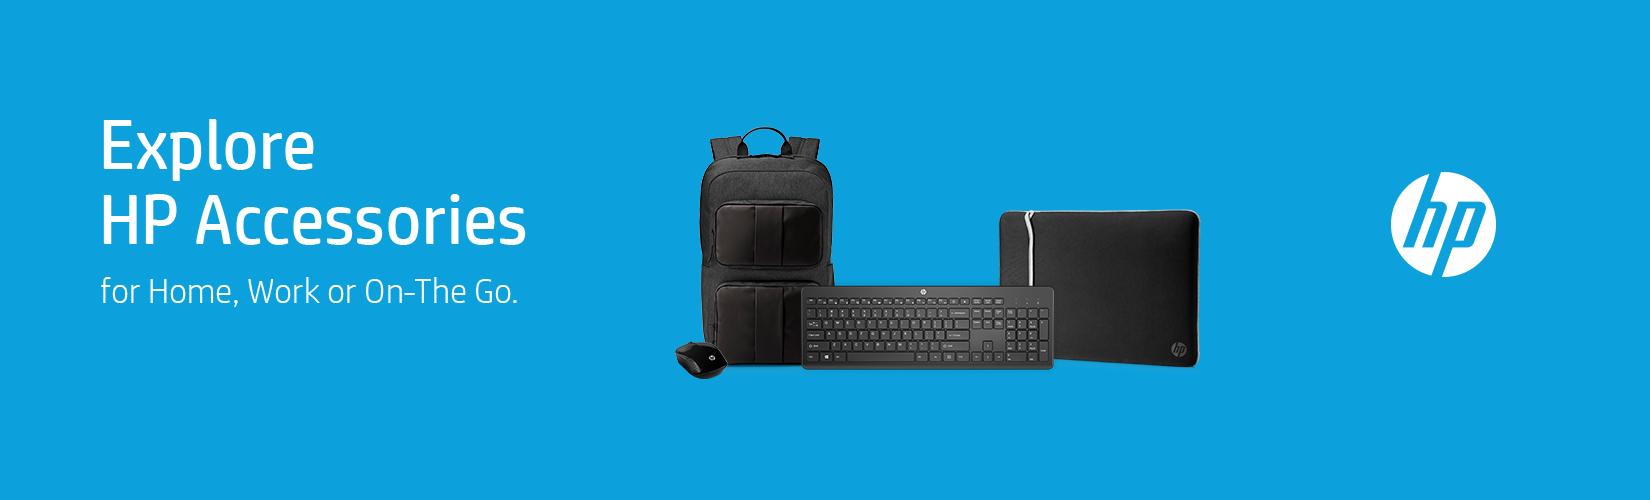 HP. Explore HP accessories for home, work or on-the go.